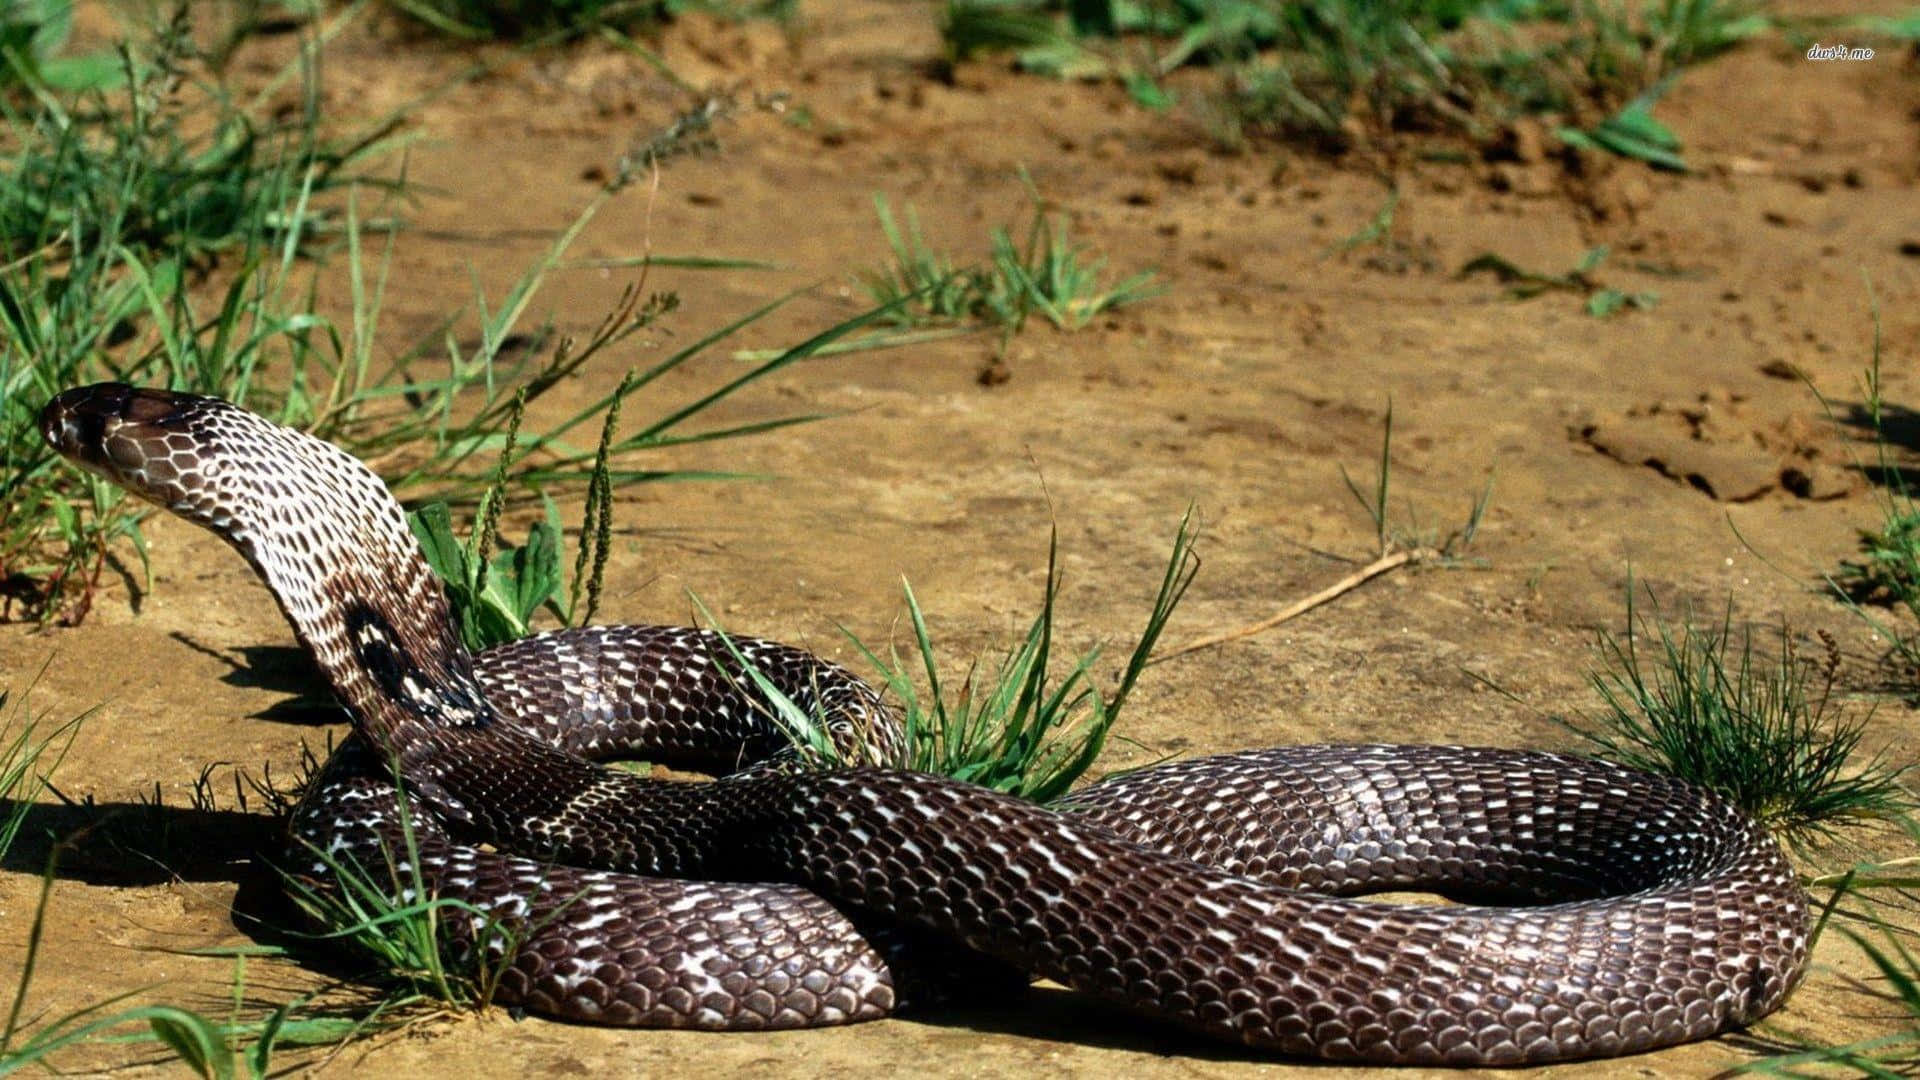 A Black And White Snake Laying On The Ground